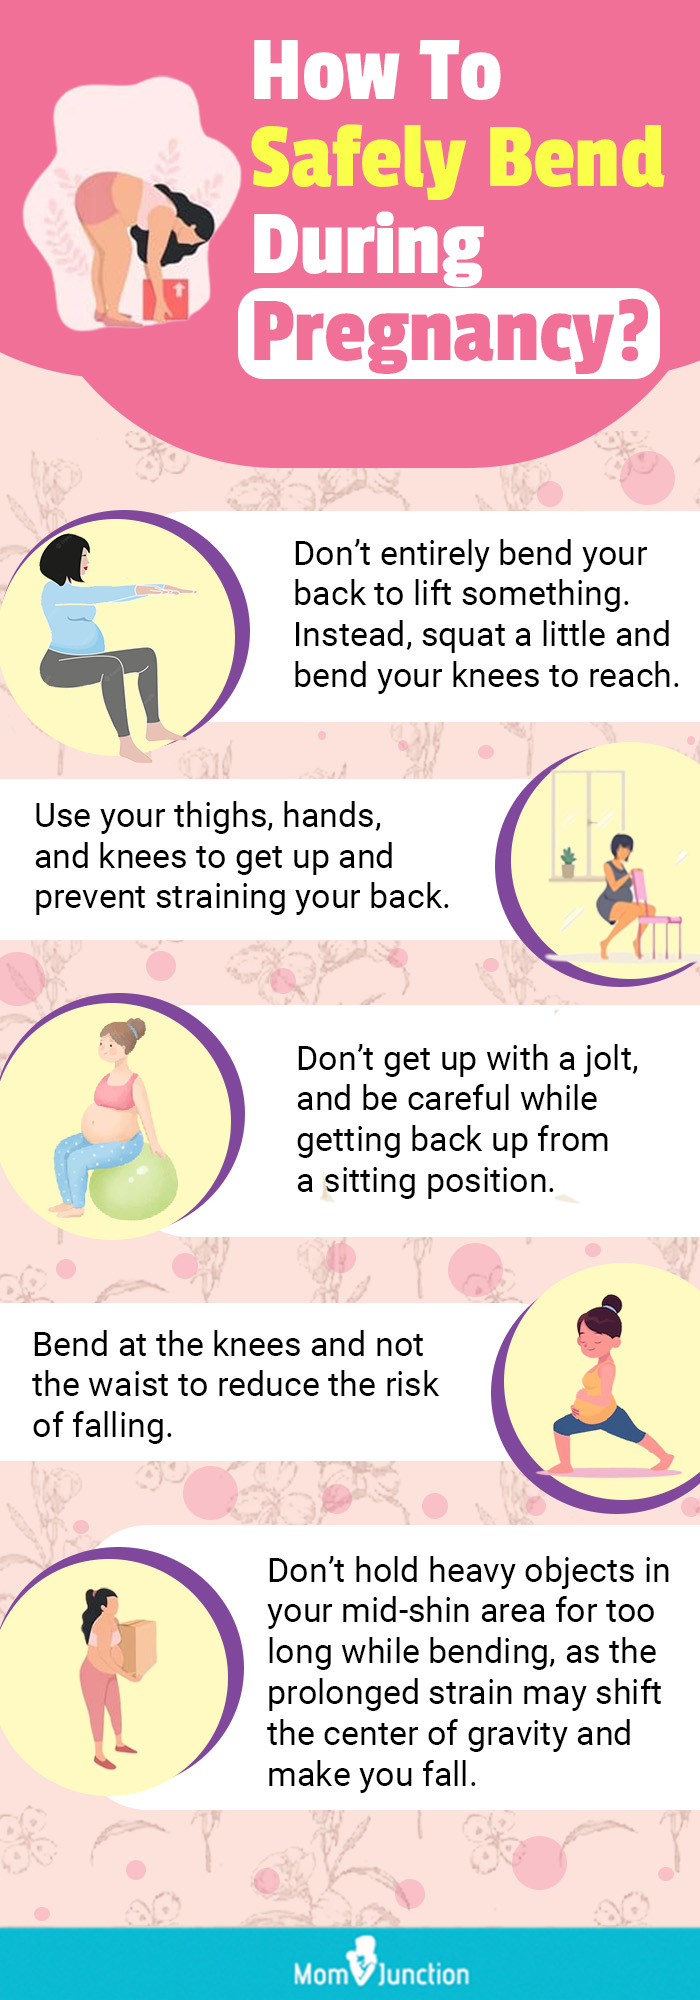 how to safely bend during pregnancy (infographic)